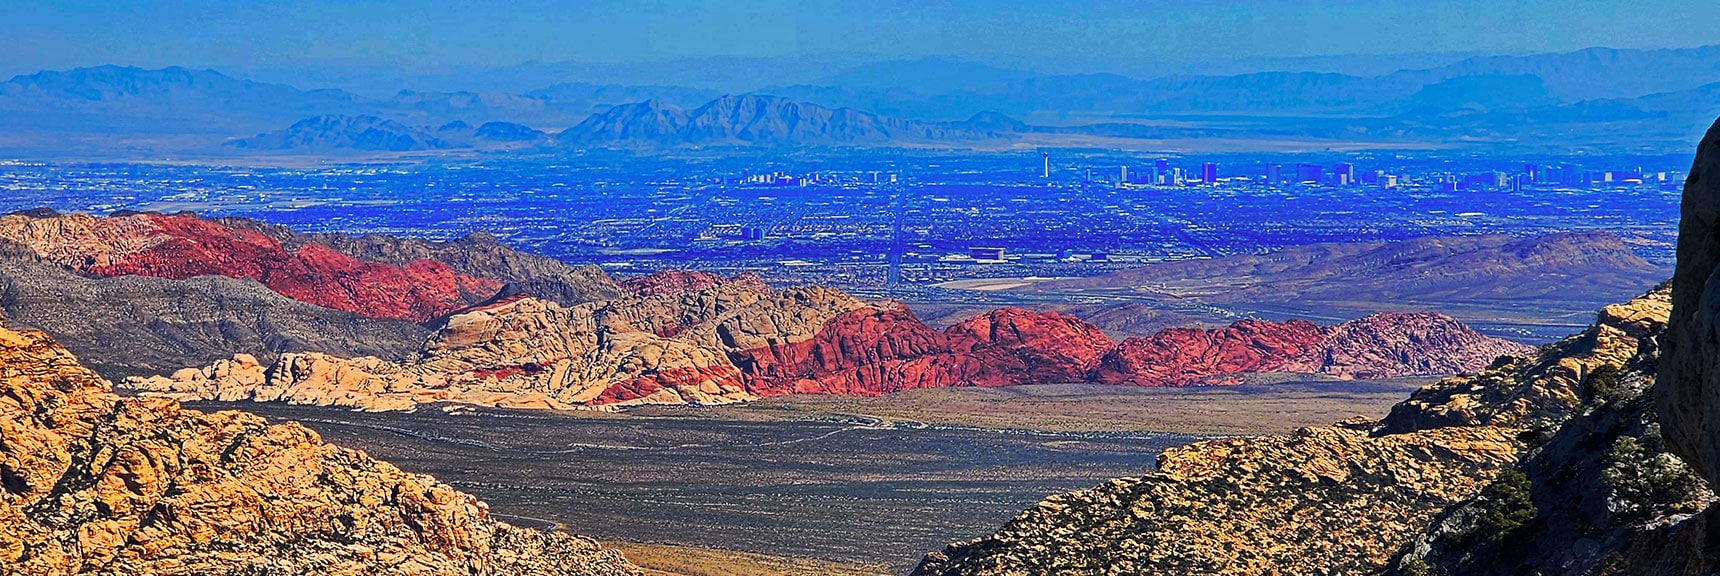 Las Vegas Valley Between Calico Hills and Frenchman Mt. | Switchback Spring Pinnacle | Wilson Ridge | Lovell Canyon, Nevada